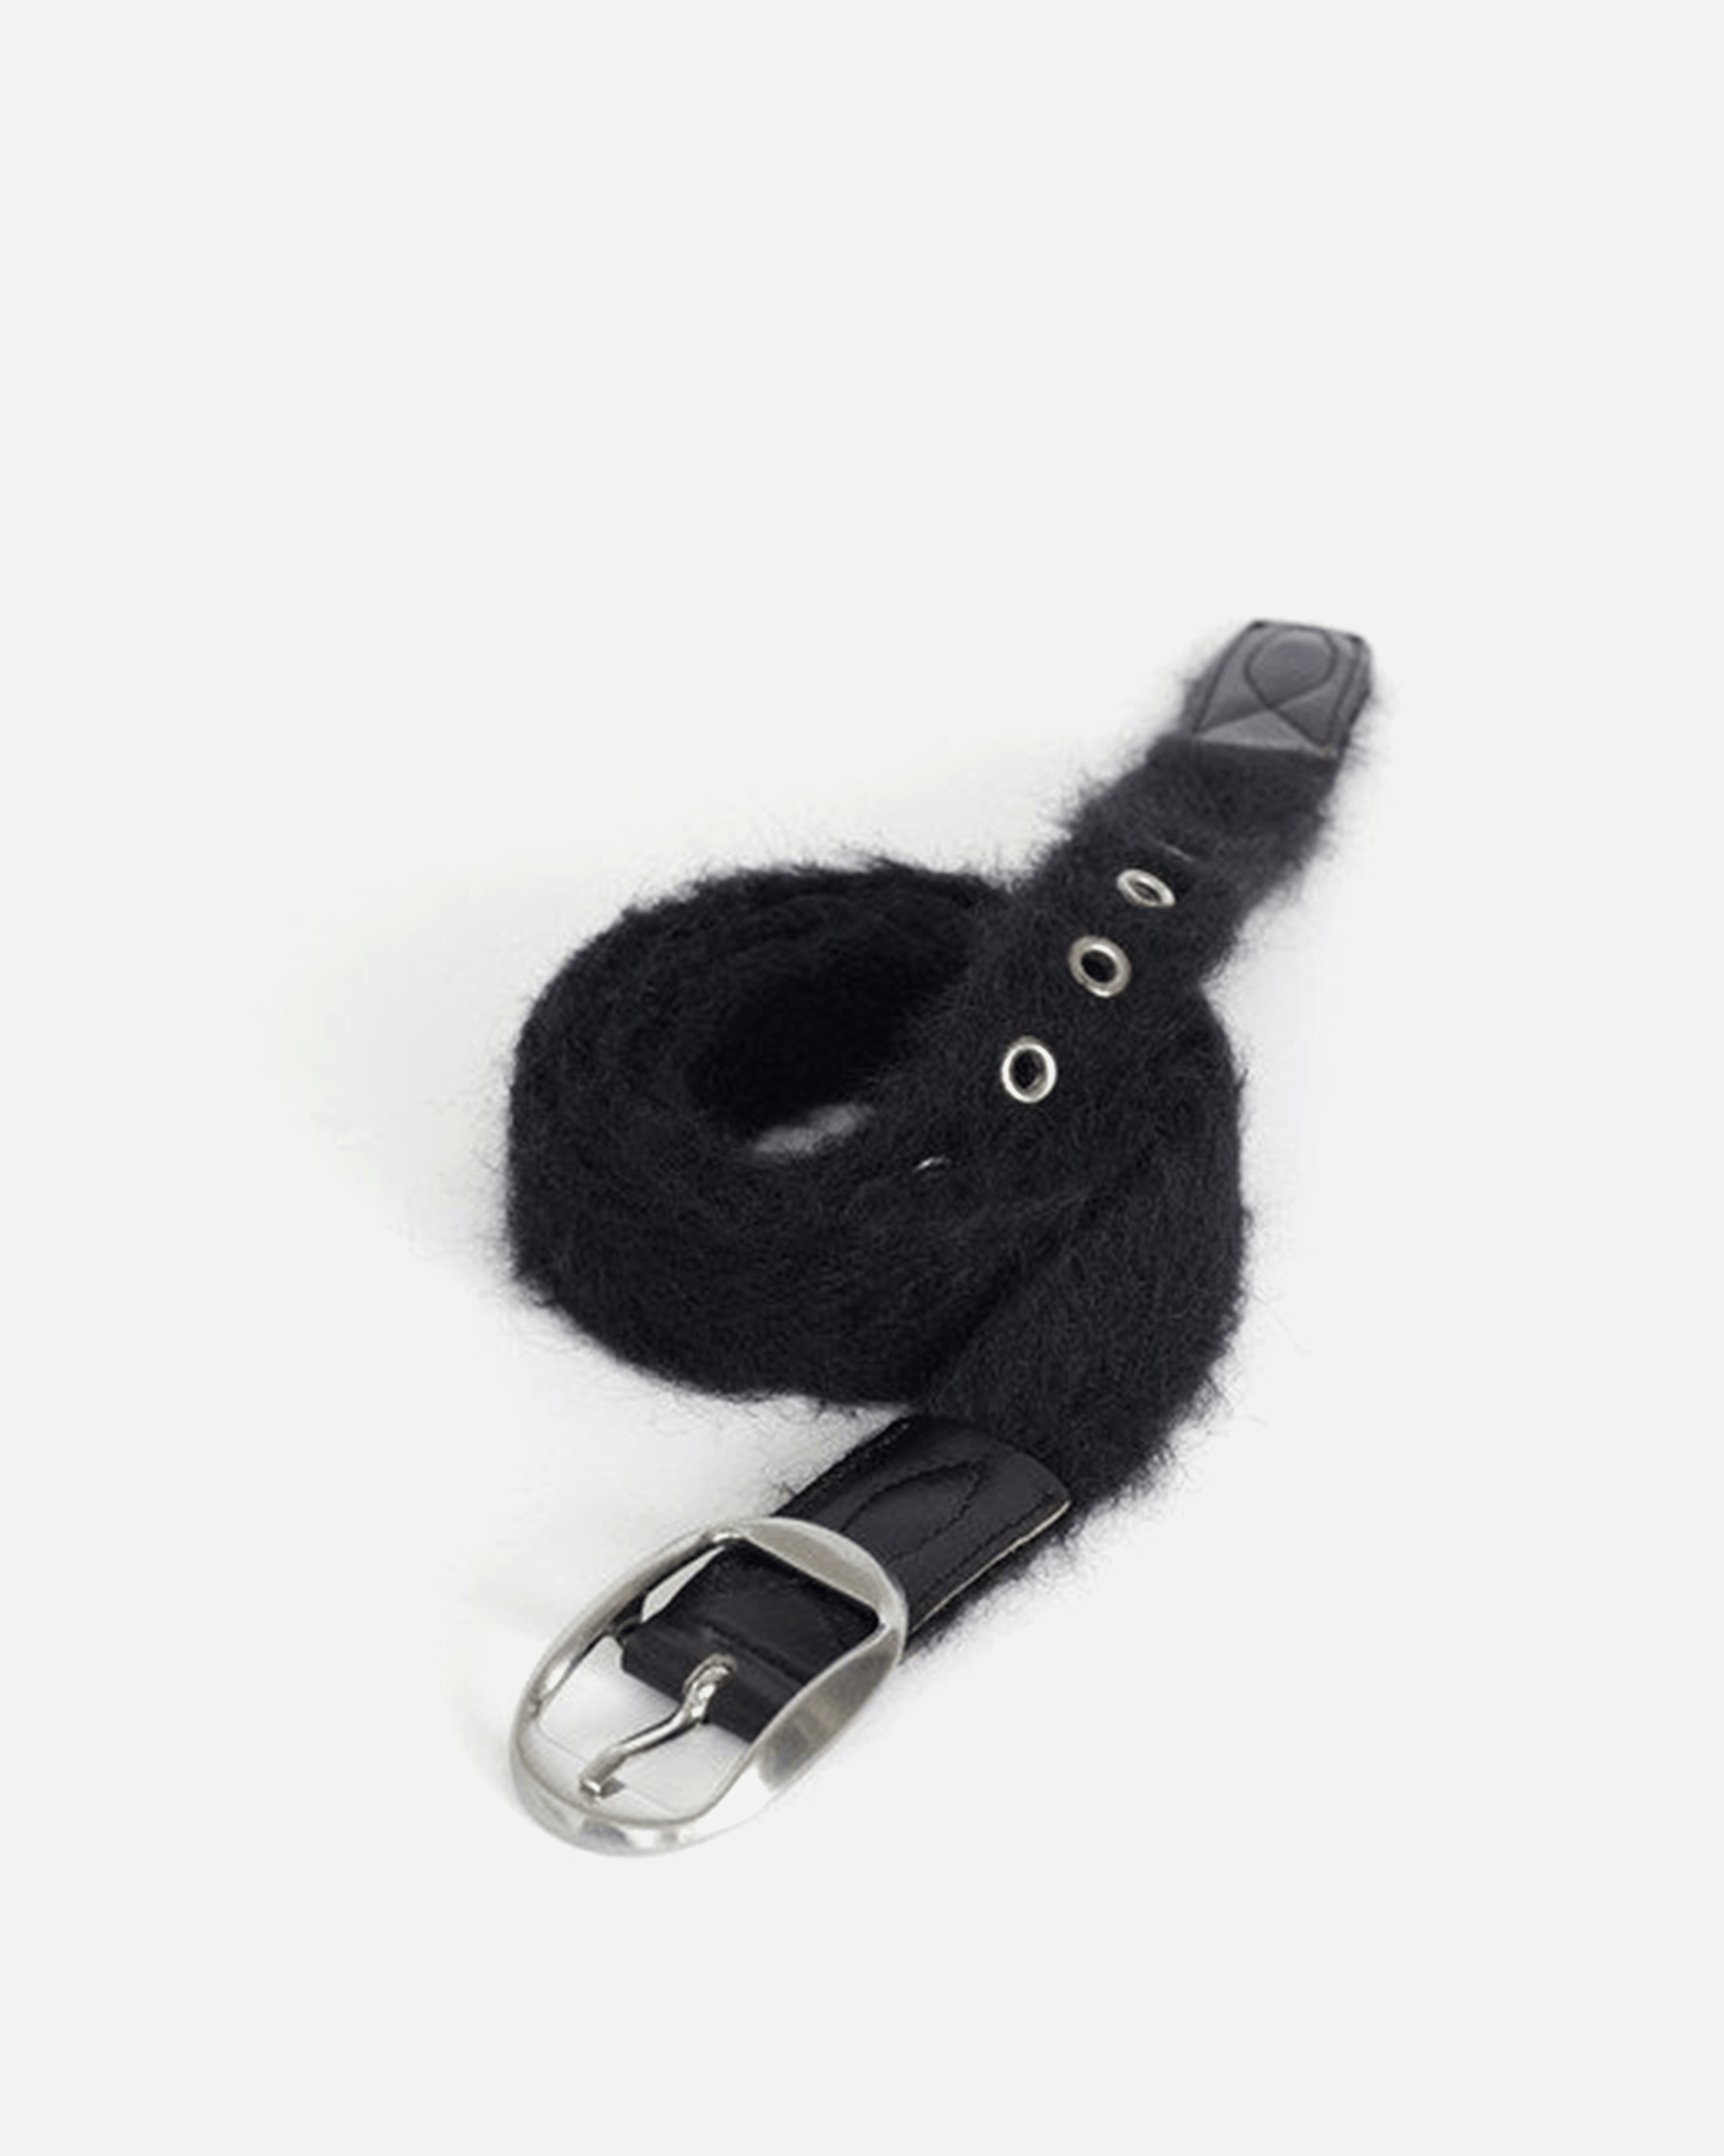 Our Legacy Leather Goods Yukio Mohair Belt in Black